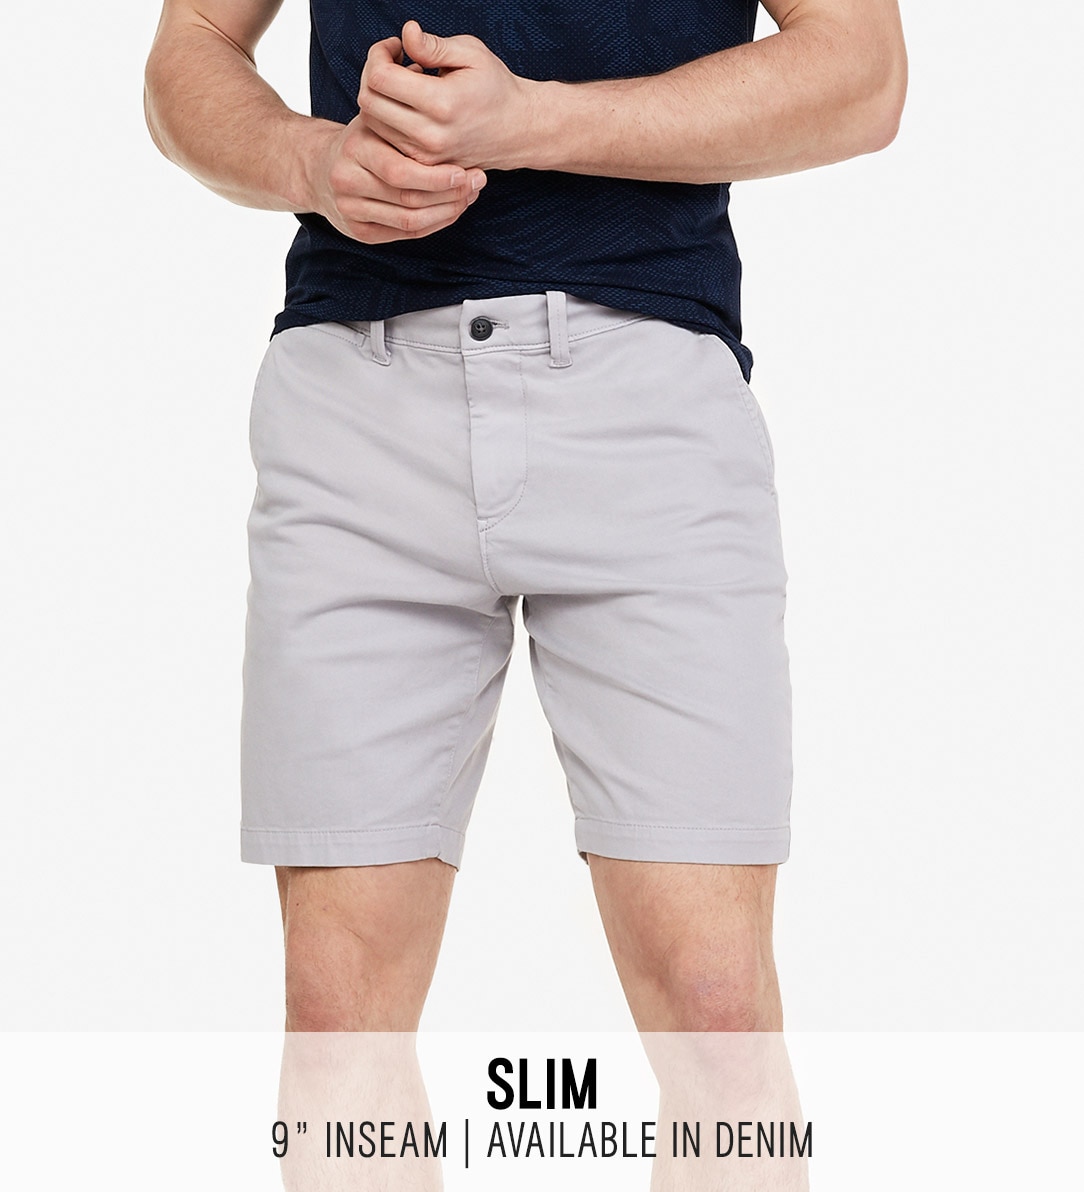 What Are Slim Fit Shorts